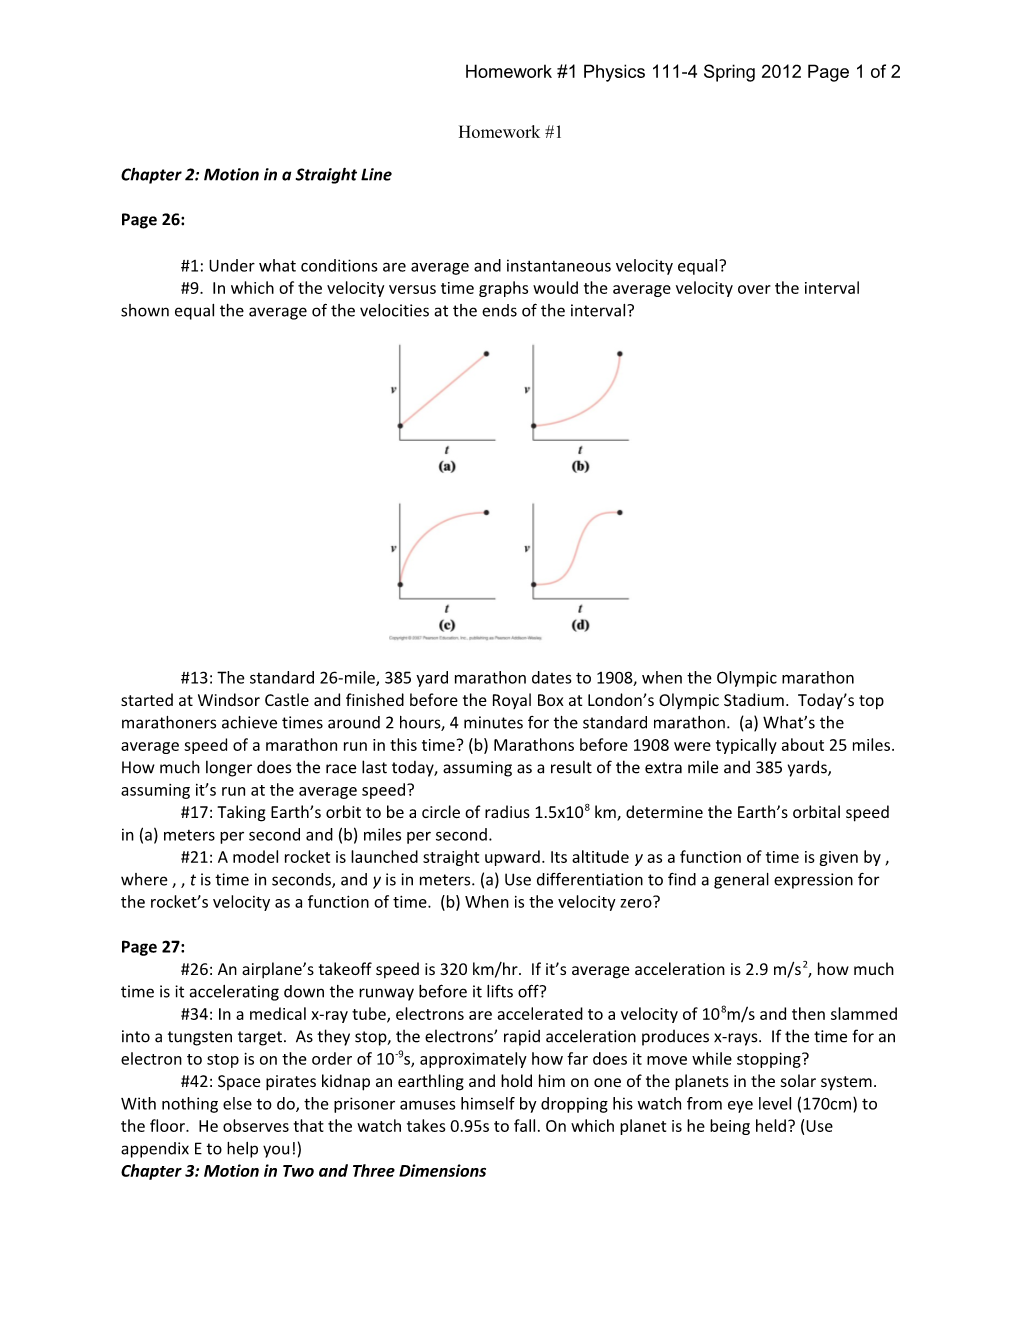 Homework #1 Physics 111-4 Spring 2012 Page 1 of 2